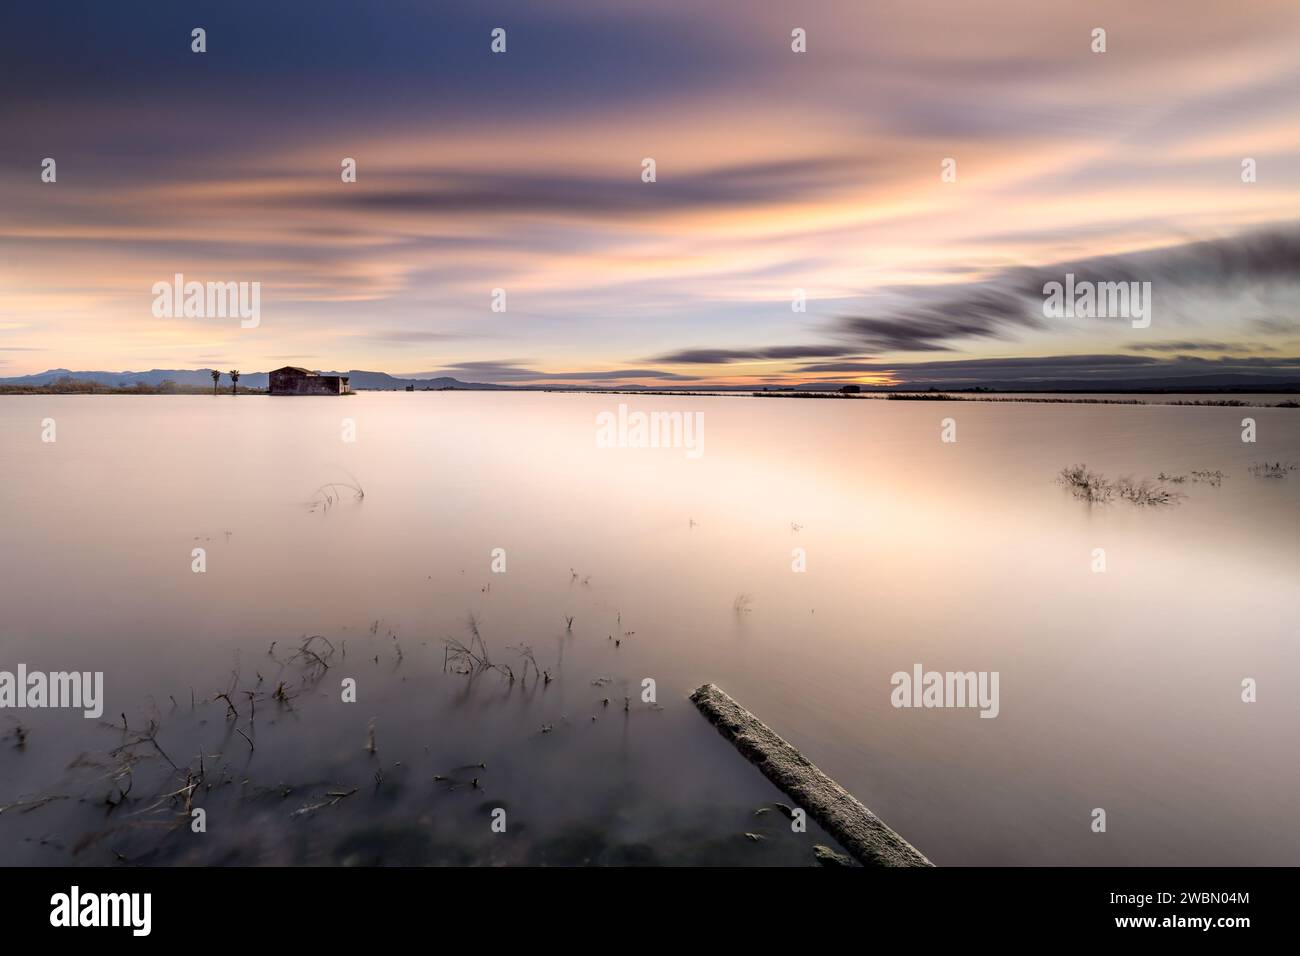 Long exposure with silky water to capture a beautiful sunset in the flooded rice fields with an idyllic landscape, Sueca, Valencia, Spain. Stock Photo